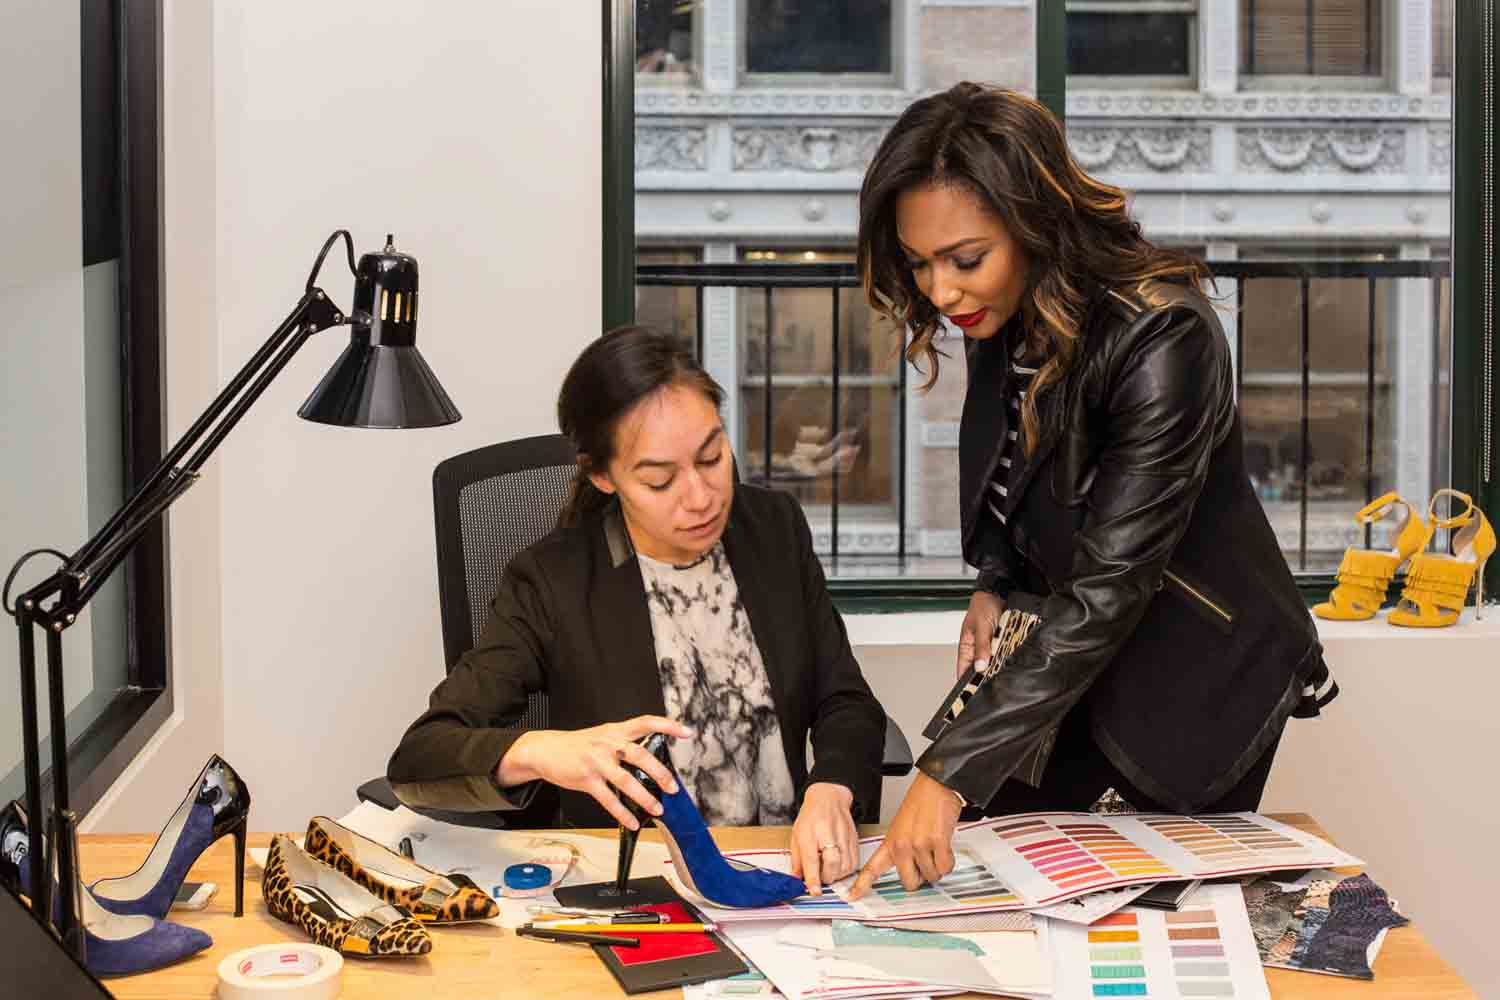 A shoe designer and her assistant at work in an office